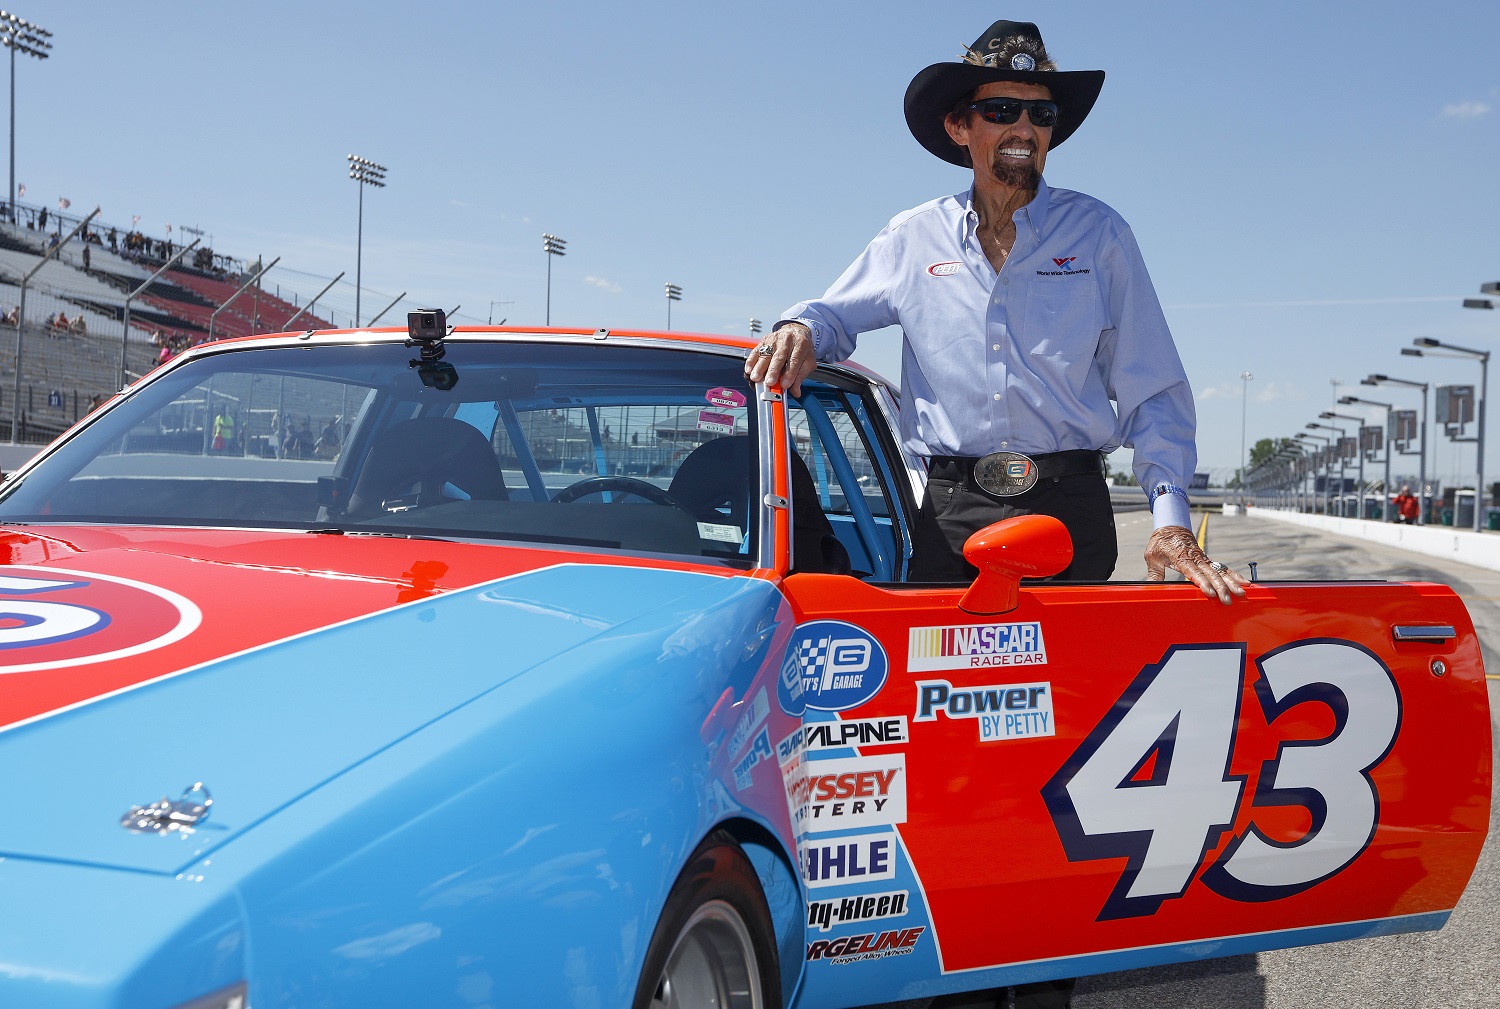 NASCAR Hall of Famer Richard Petty prepares to drive a replica of his No. 43 STP Pontiac during practice for the NASCAR Cup Series Enjoy Illinois 300 at WWT Raceway on June 3, 2022.